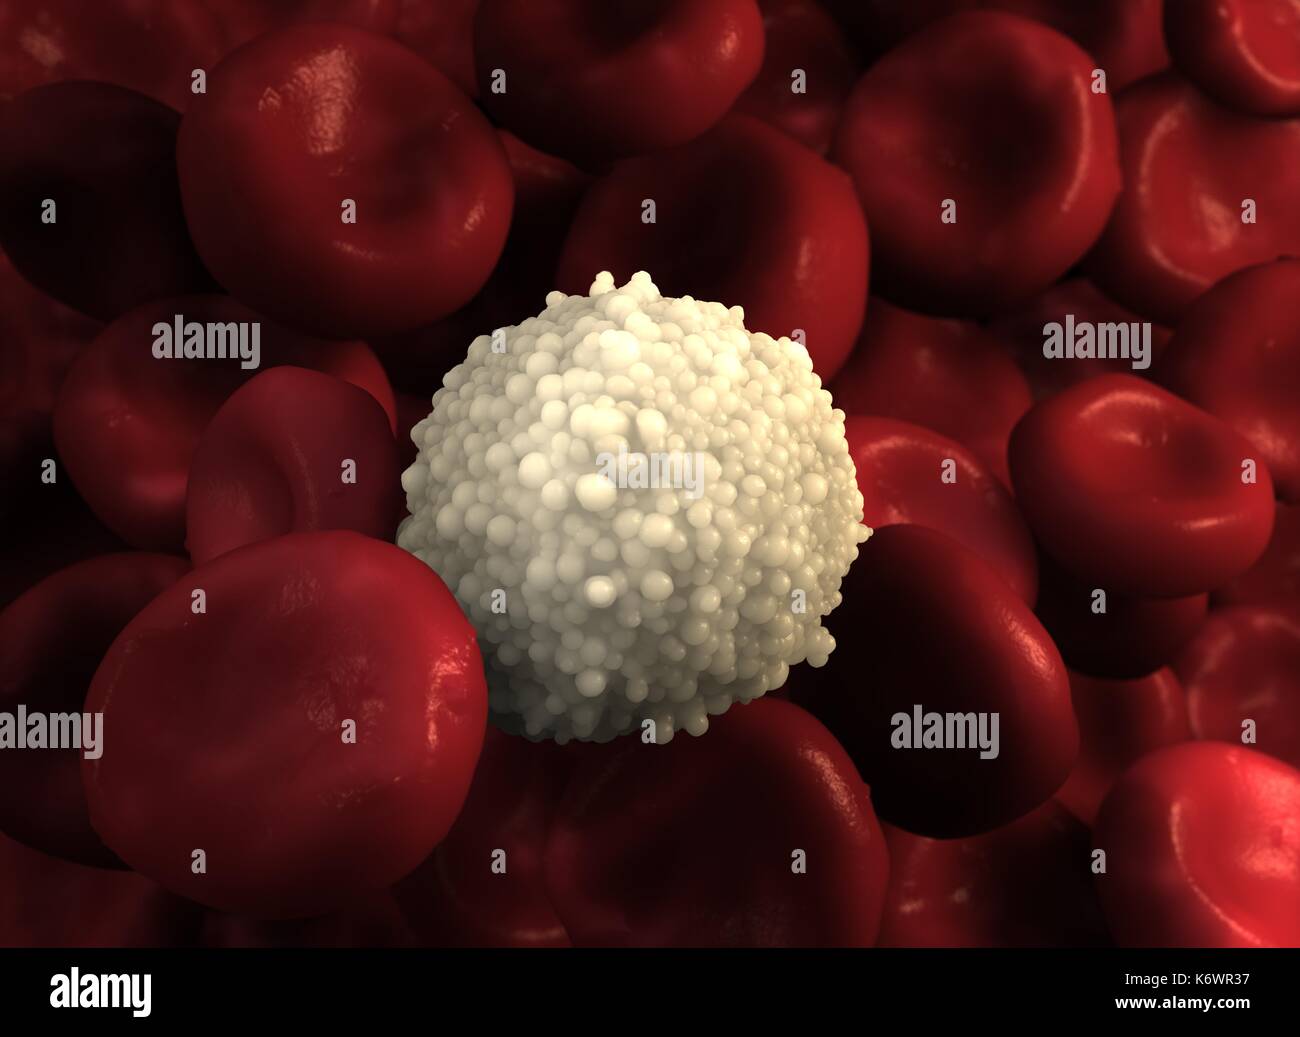 Single Granular Leukocyte isolated on with red blood cells in foreground and background. Artistic 3D rendering for medical / scientific use. Stock Photo